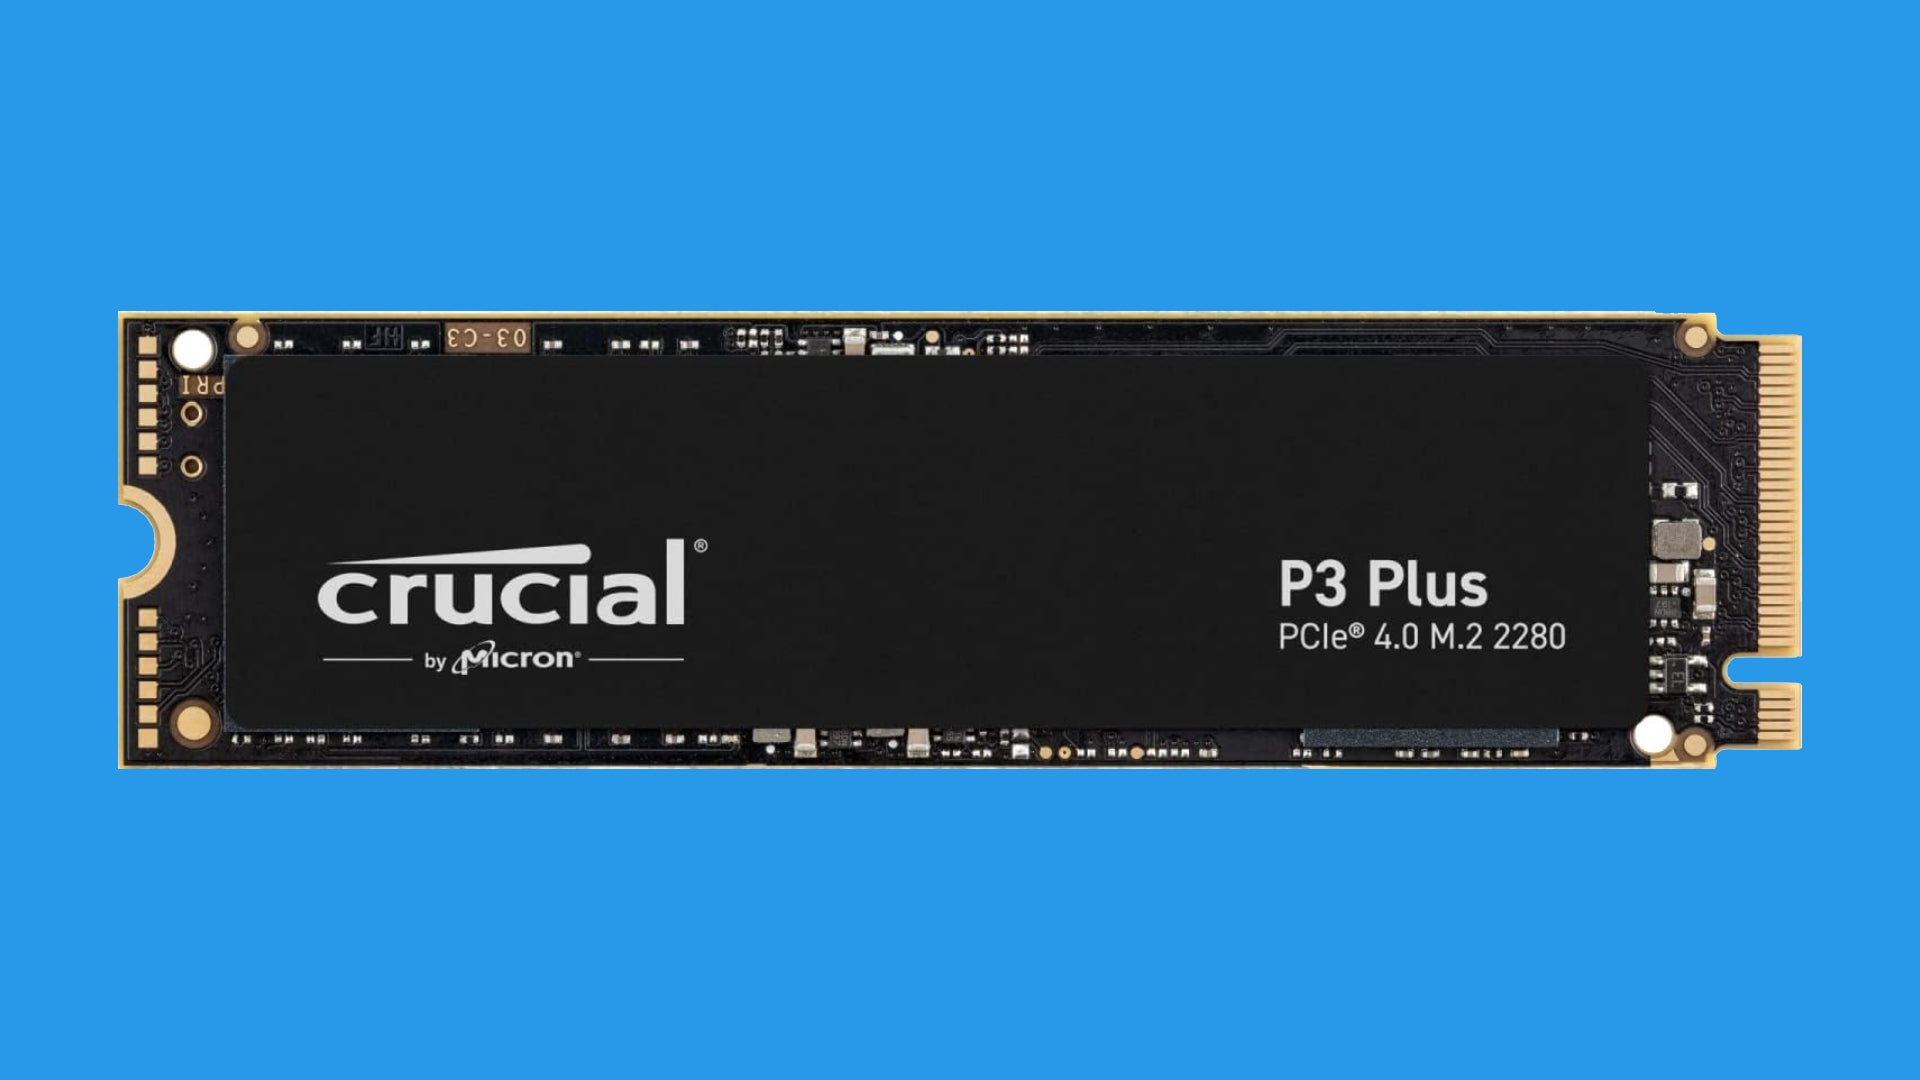 Grab a 1TB Crucial P3 Plus PCIe SSD for just £38 at Amazon 